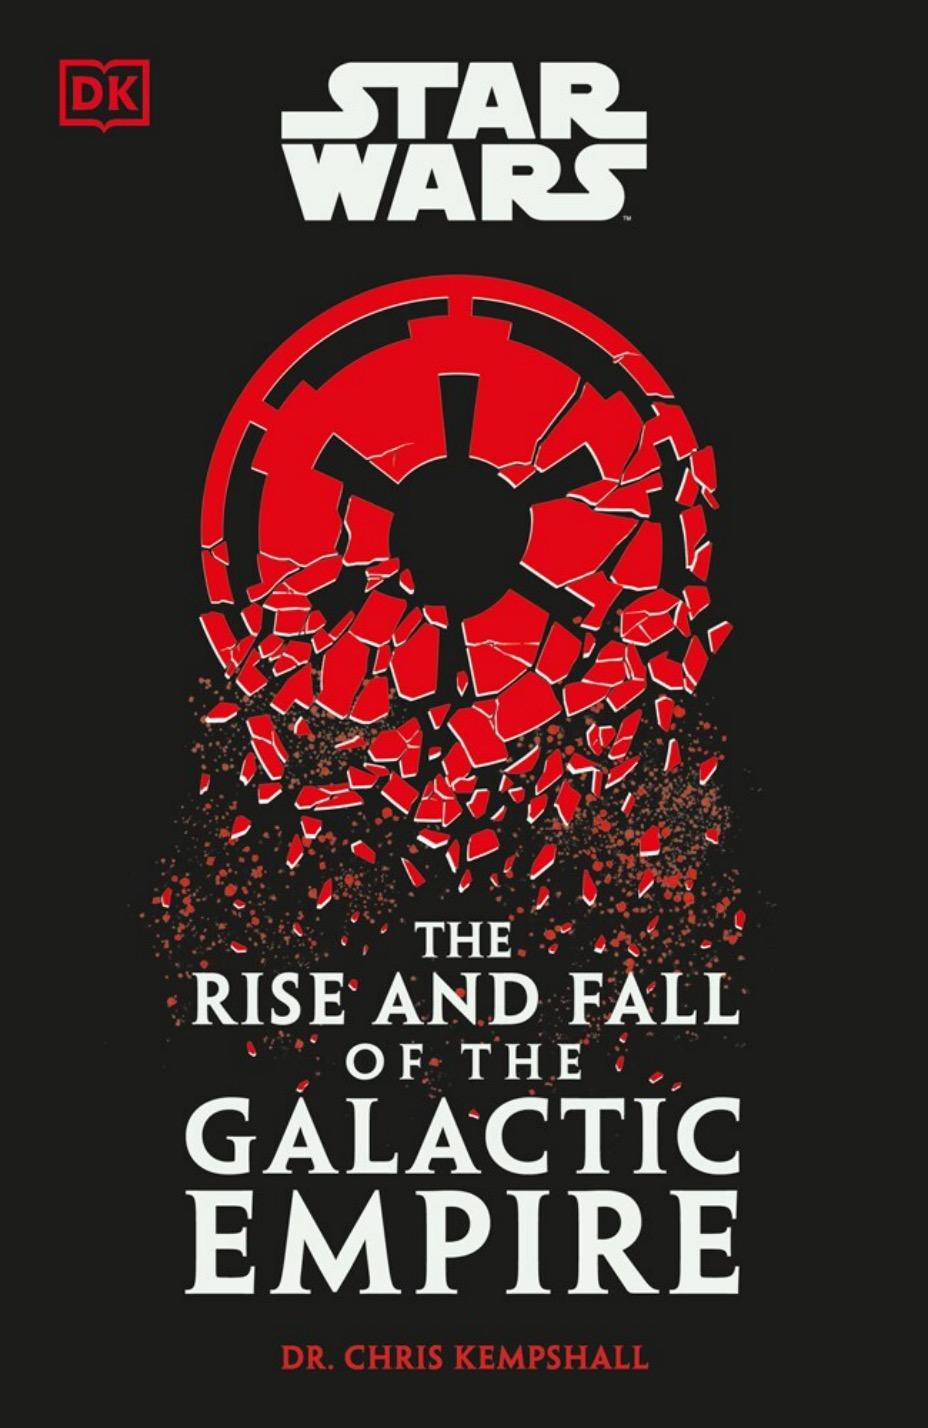 star-wars-the-rise-and-fall-of-the-galactic-empire-book.jpg